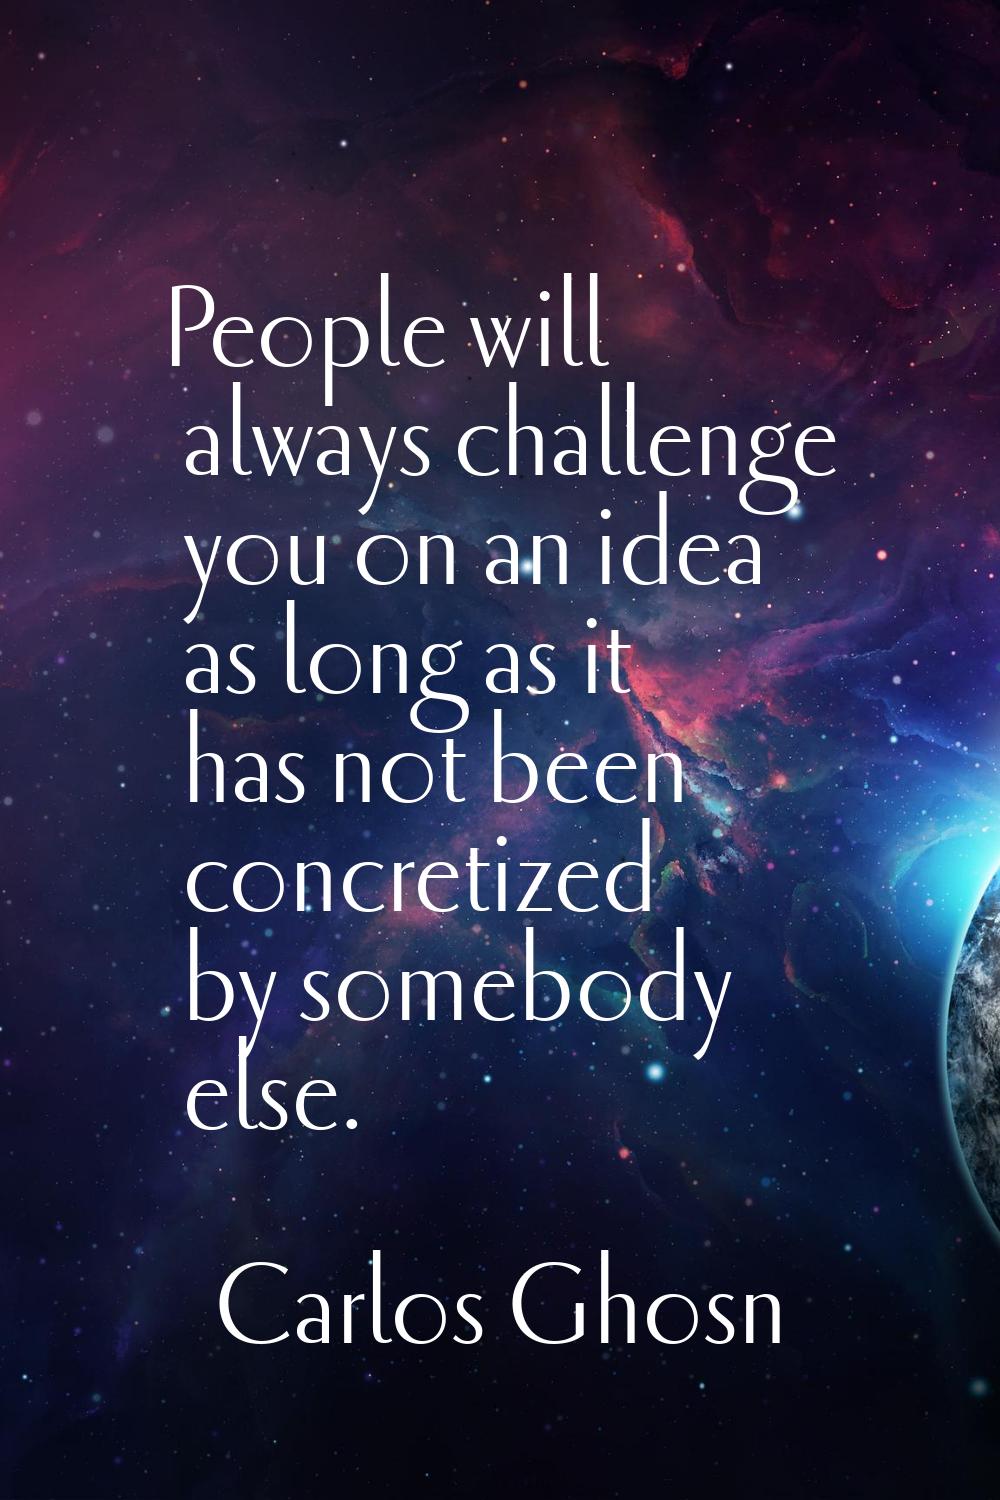 People will always challenge you on an idea as long as it has not been concretized by somebody else